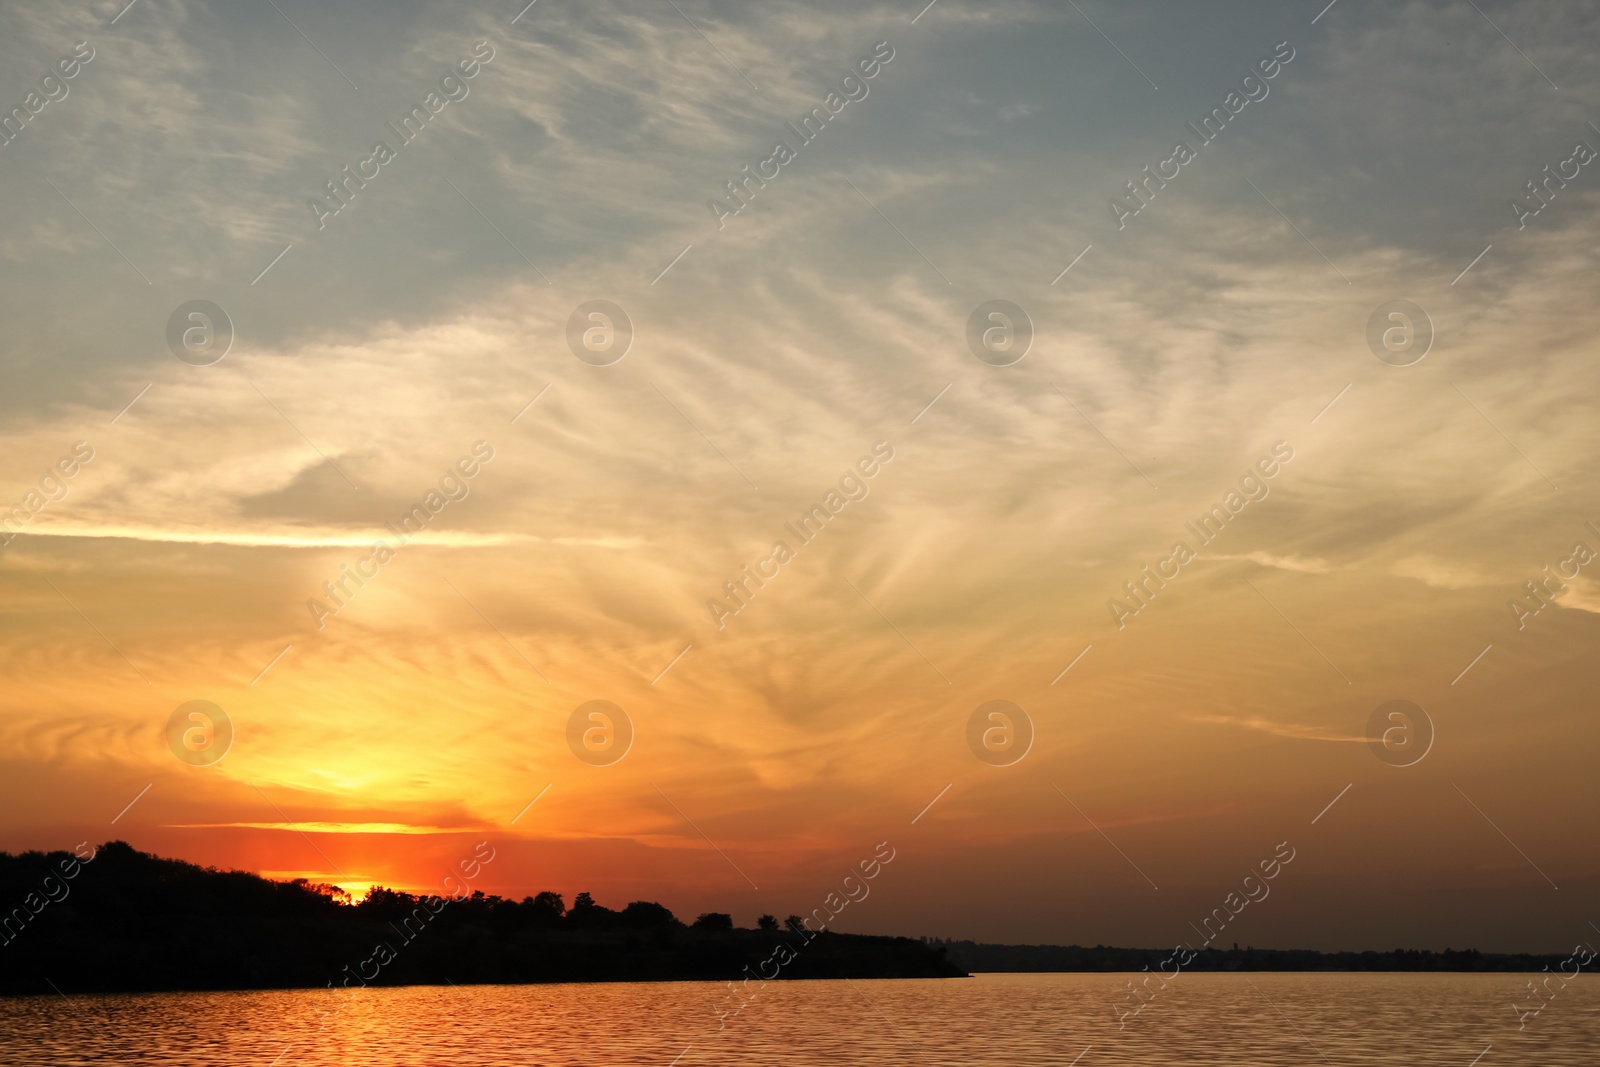 Photo of Picturesque view of tranquil river at sunset